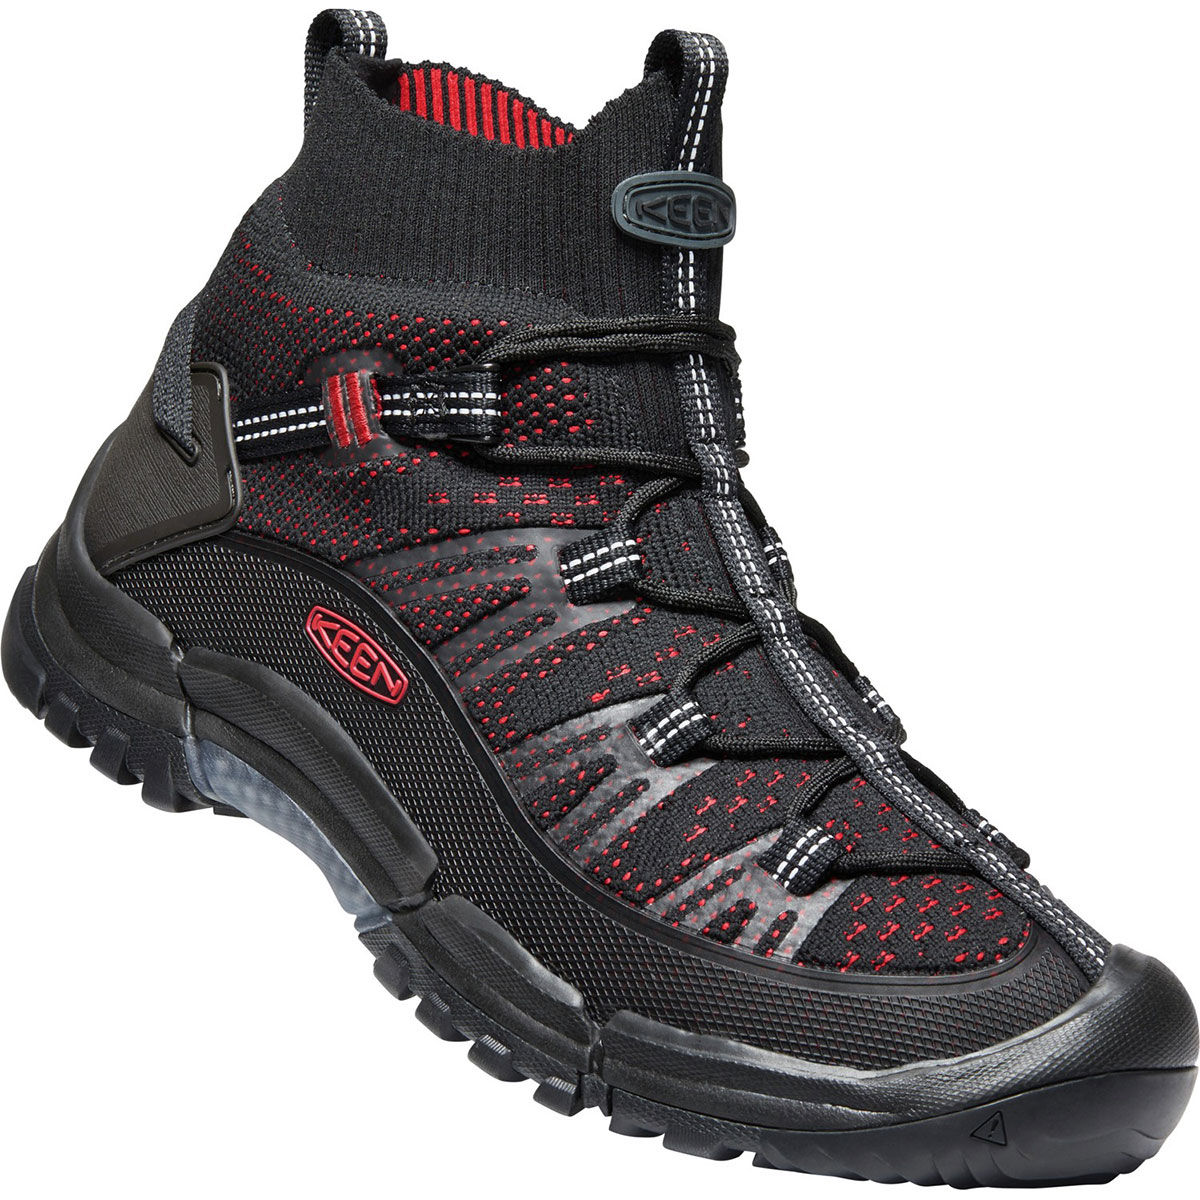 Keen Men's Axis Evo Mid Knit Hiking Boots - Black, 12